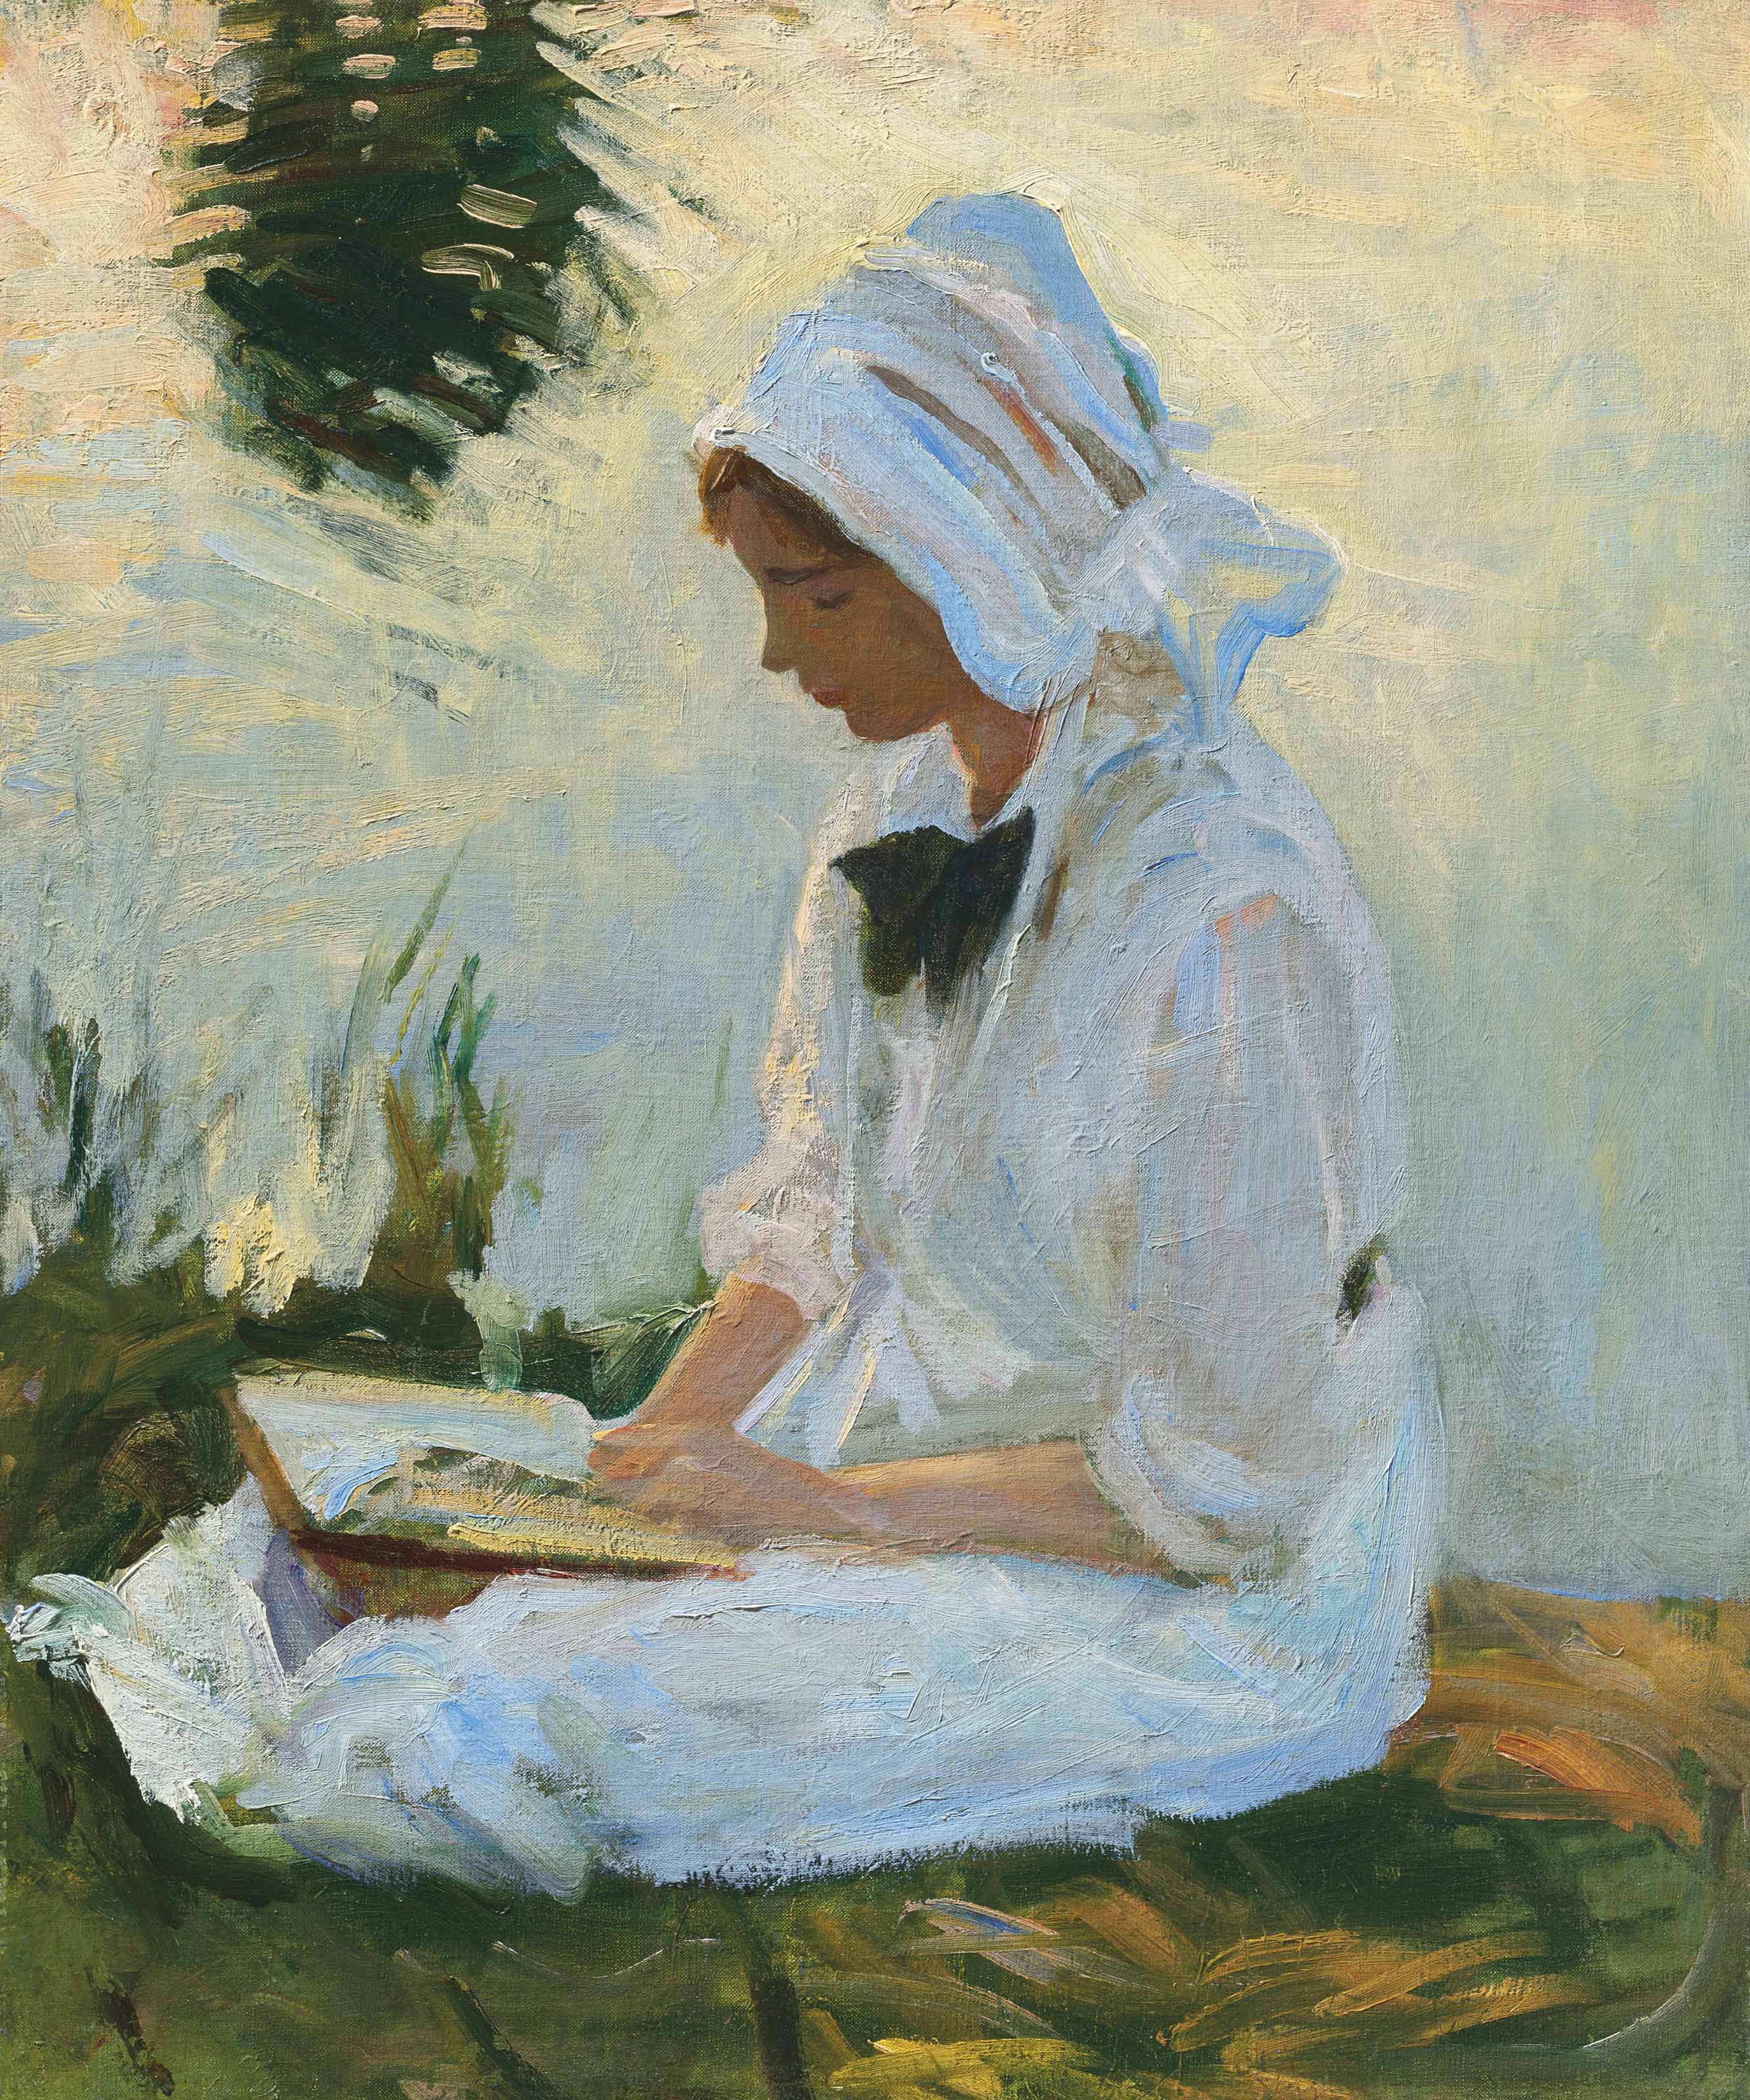 Girl Reading by a Stream by John Singer Sargent - c. 1888 - 61 x 50.8 cm private collection